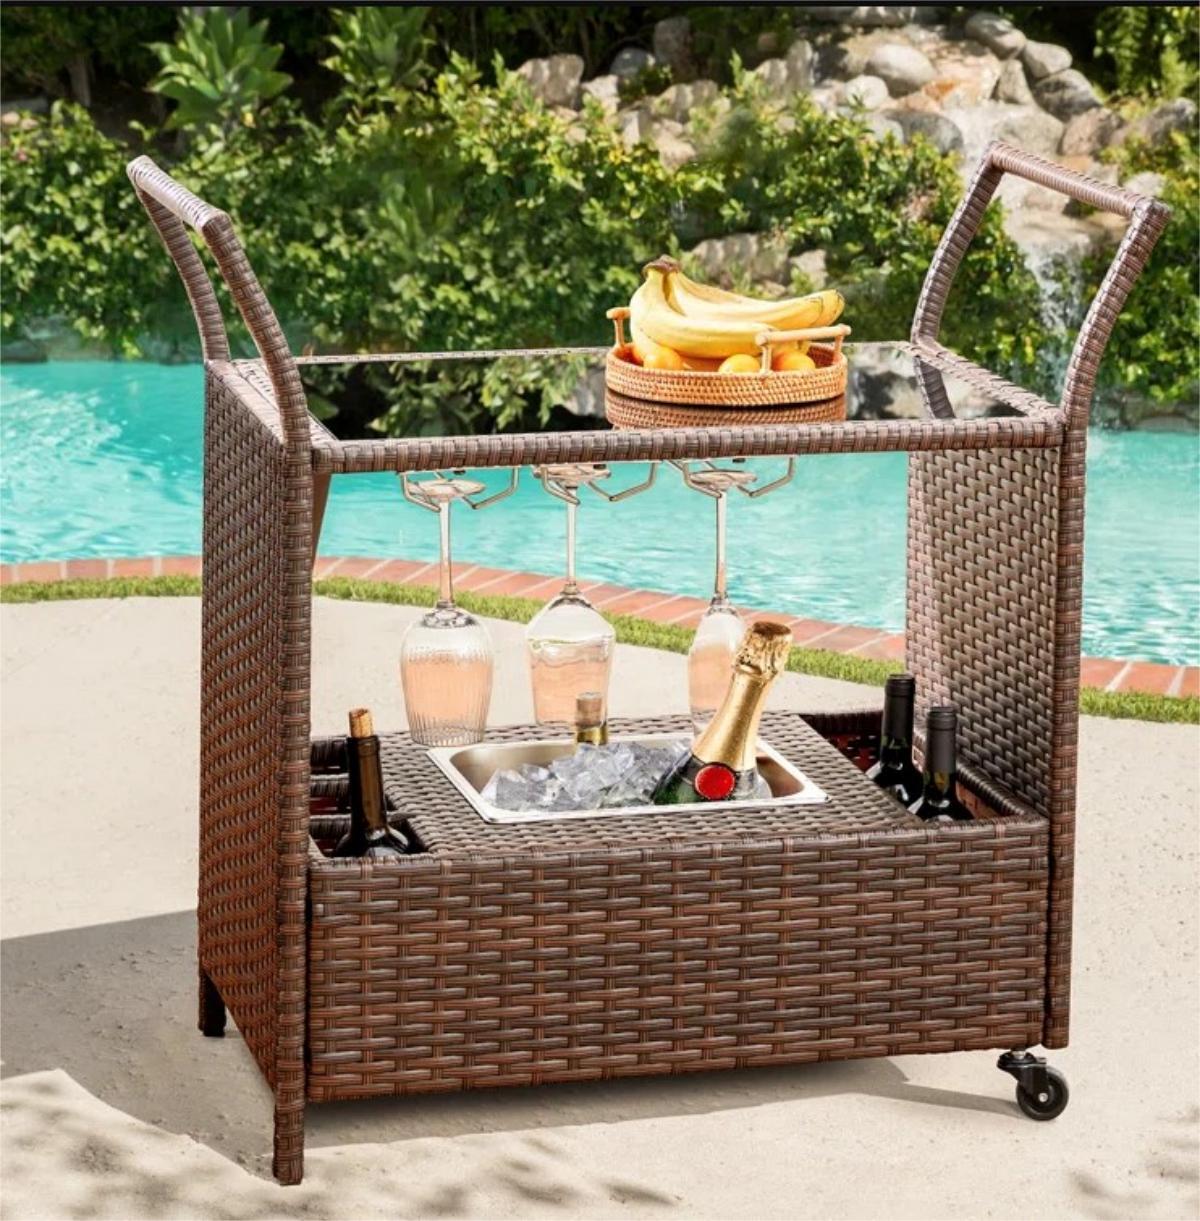 homrest-outdoor-wicker-bar-cart-with-removable-ice-bucket-rattan-bar-serving-cart-with-glass-holder-and-wheels-beverage-cart-with-glass-countertop-for-pool-party-backyard